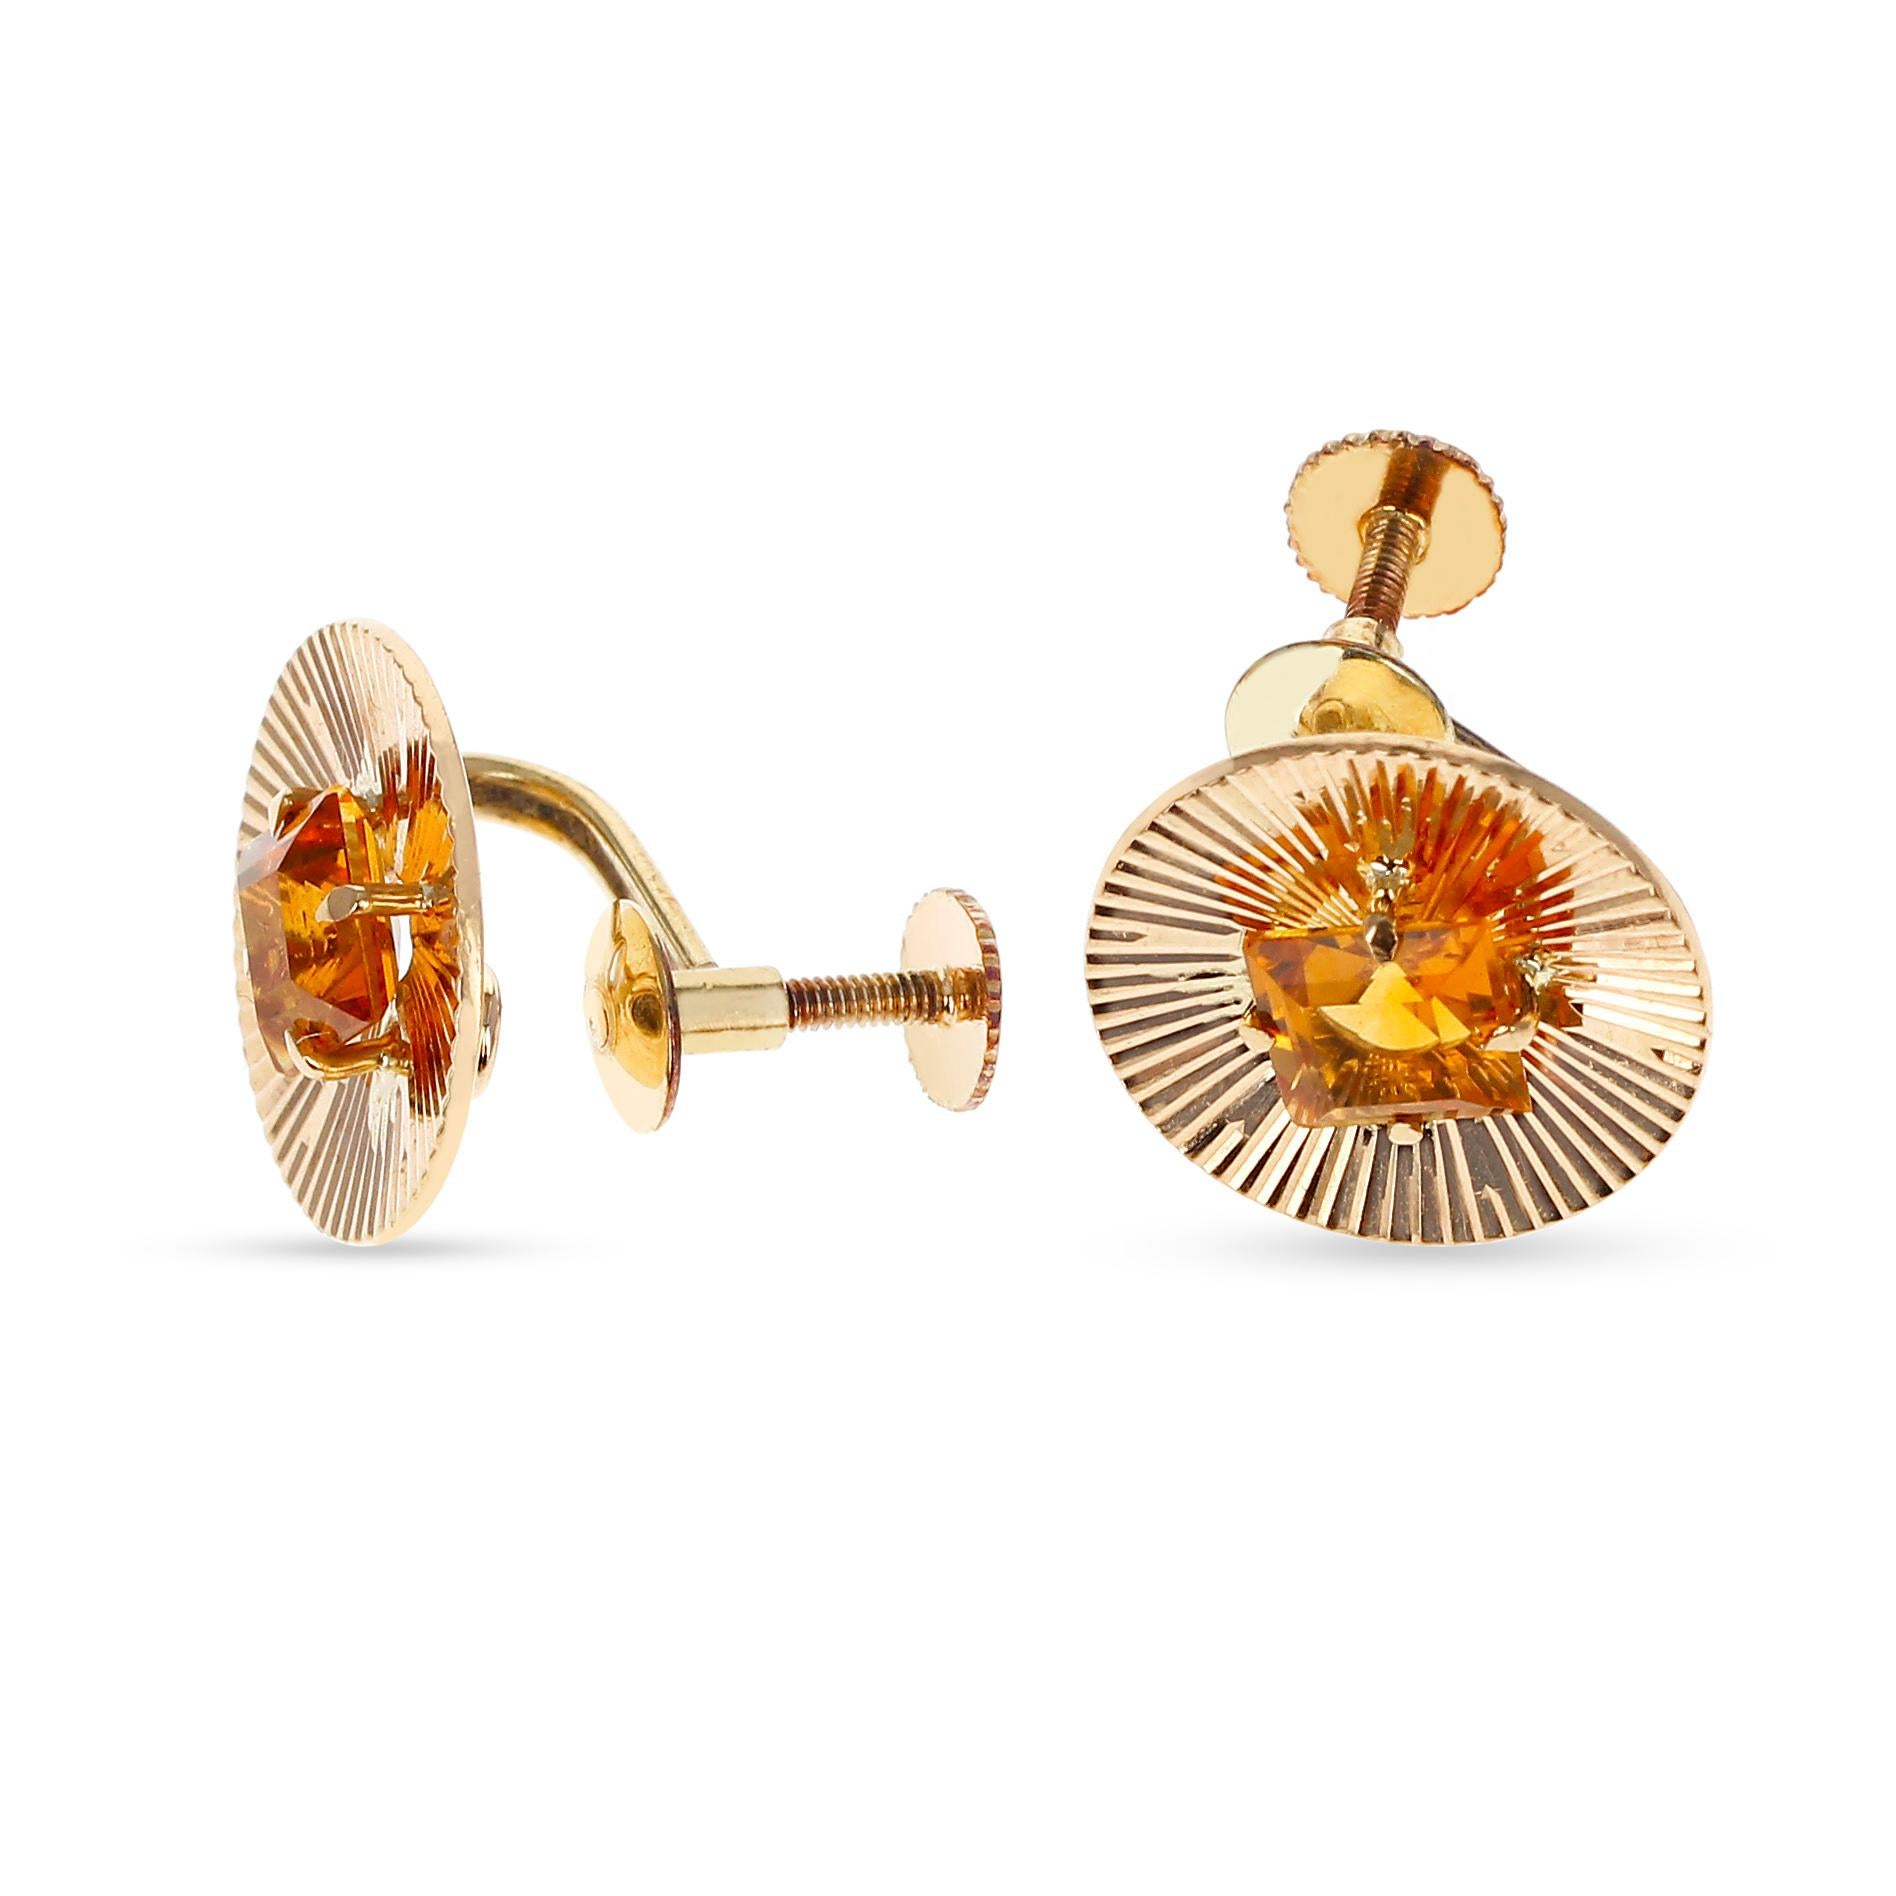 A pair of Retro Tiffany & Co. Citrine Earrings made in 14K Yellow Gold. The size of the citrines are 6MM. The length of the earrings are 0.60